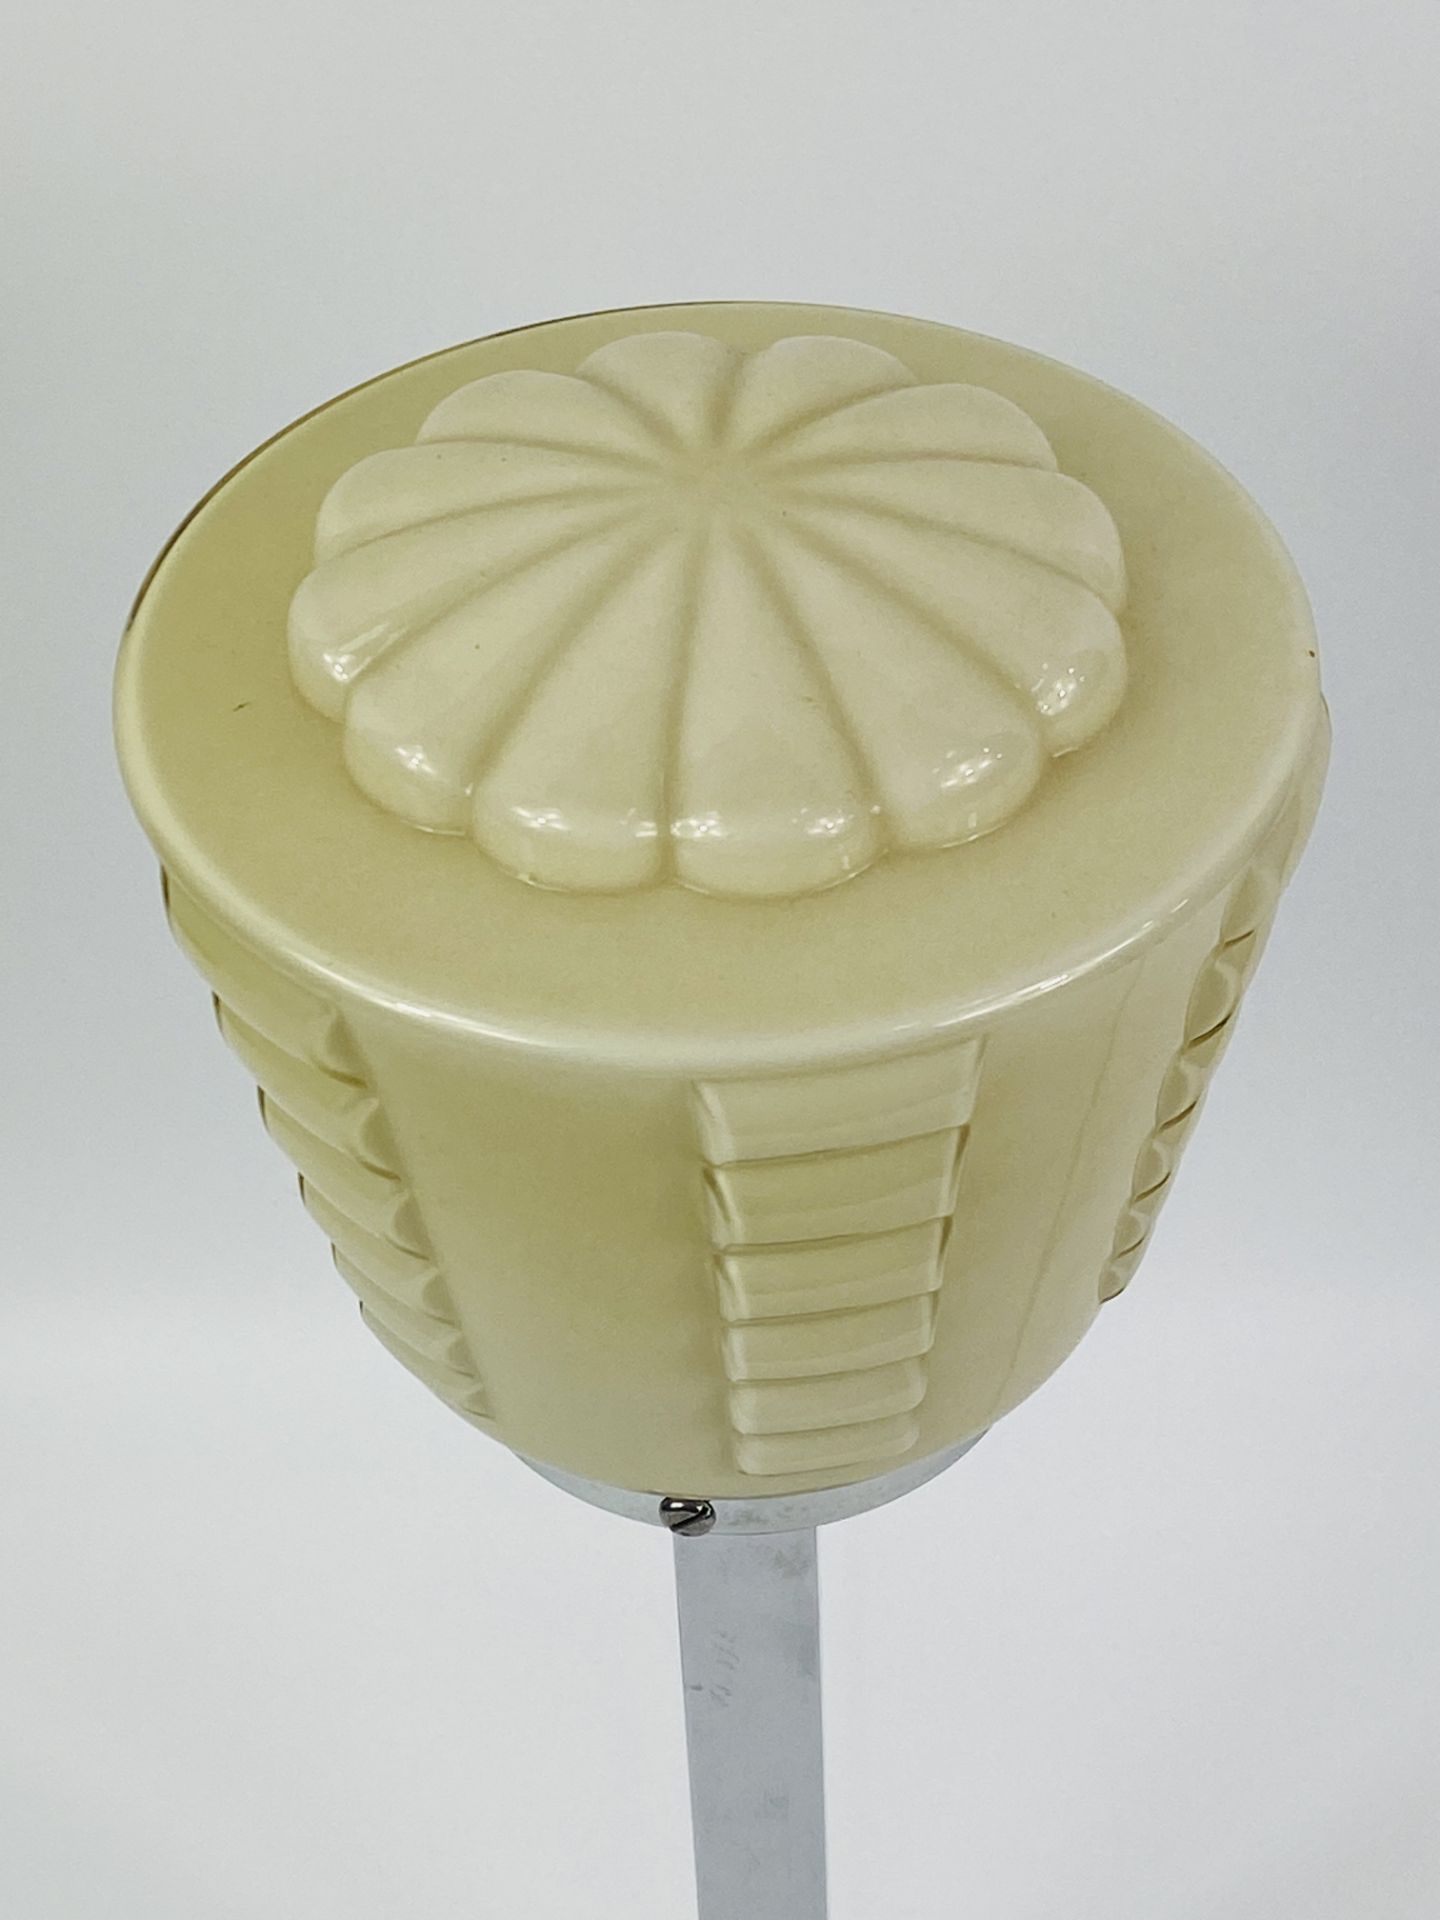 Art deco table lamp - Image 2 of 5